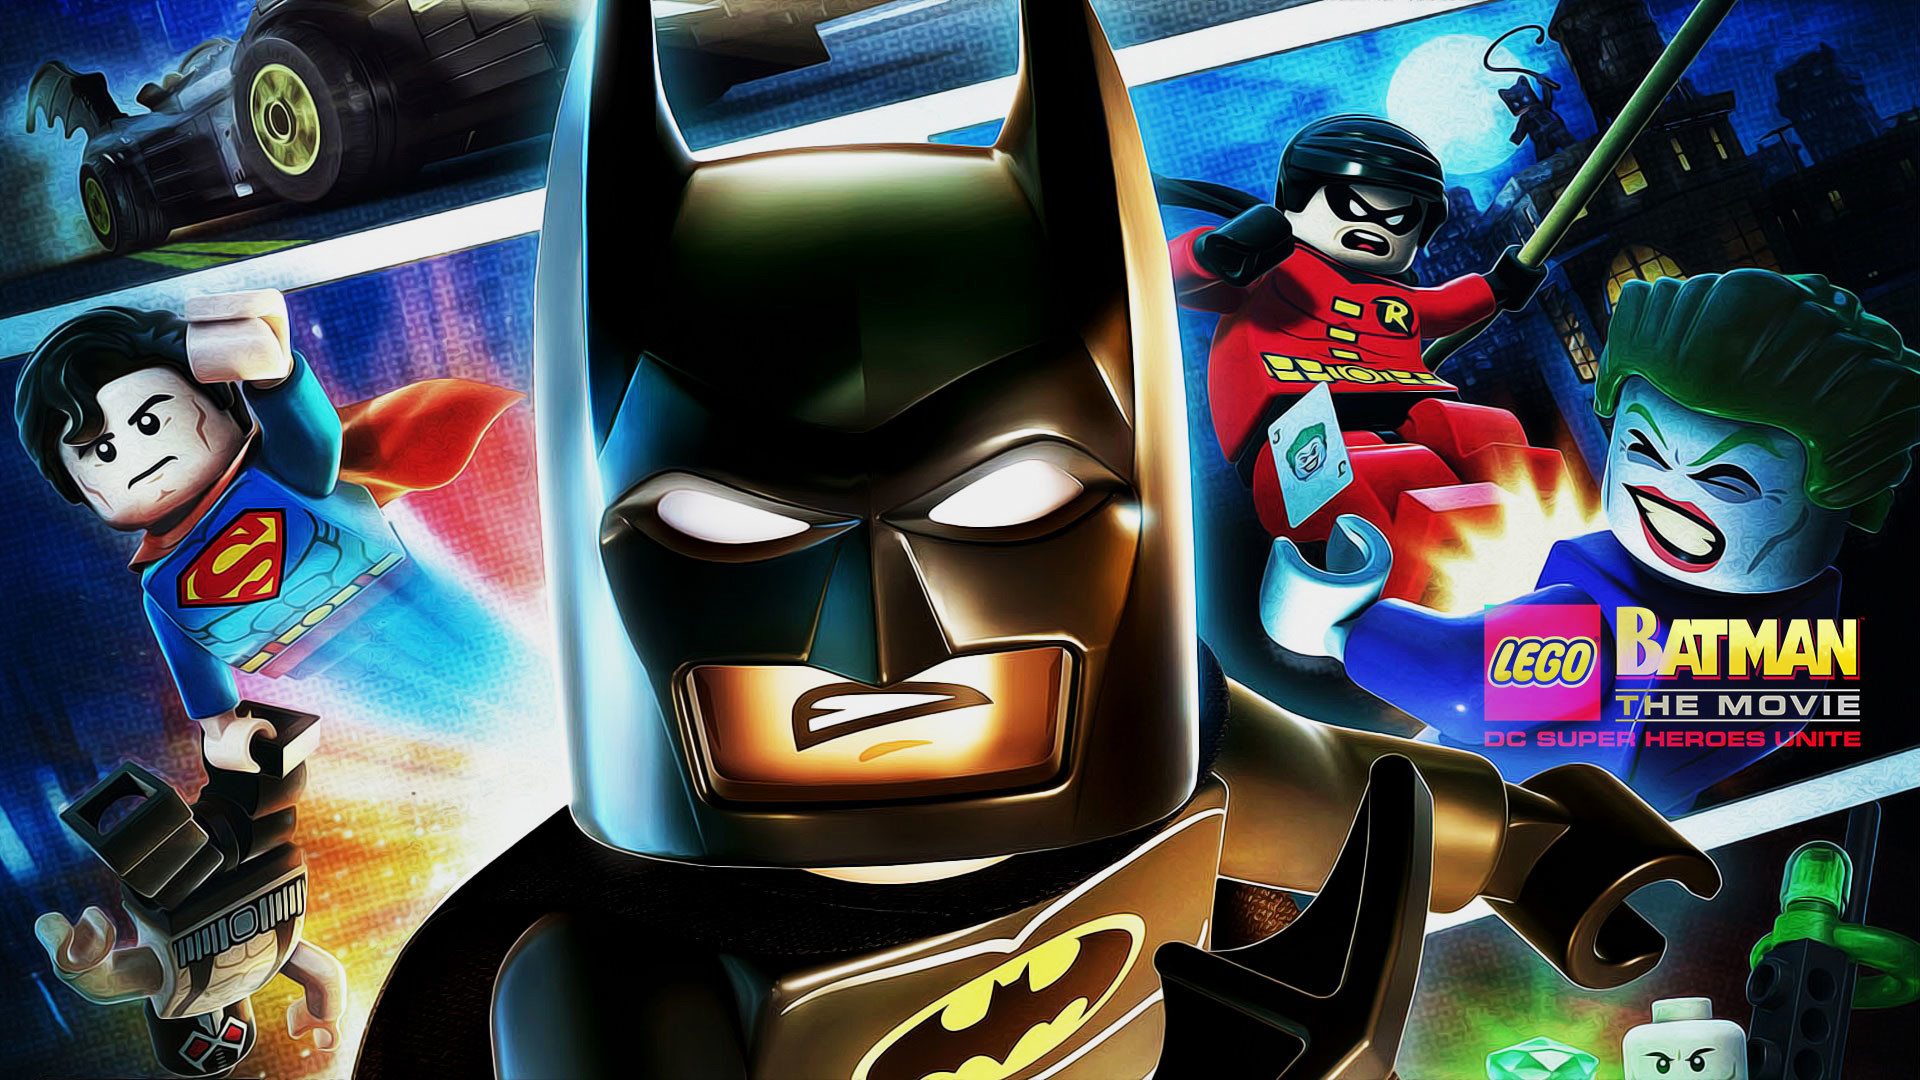 1920x1080 spin-off of The Lego Movie (2014) centering on the character of Batman